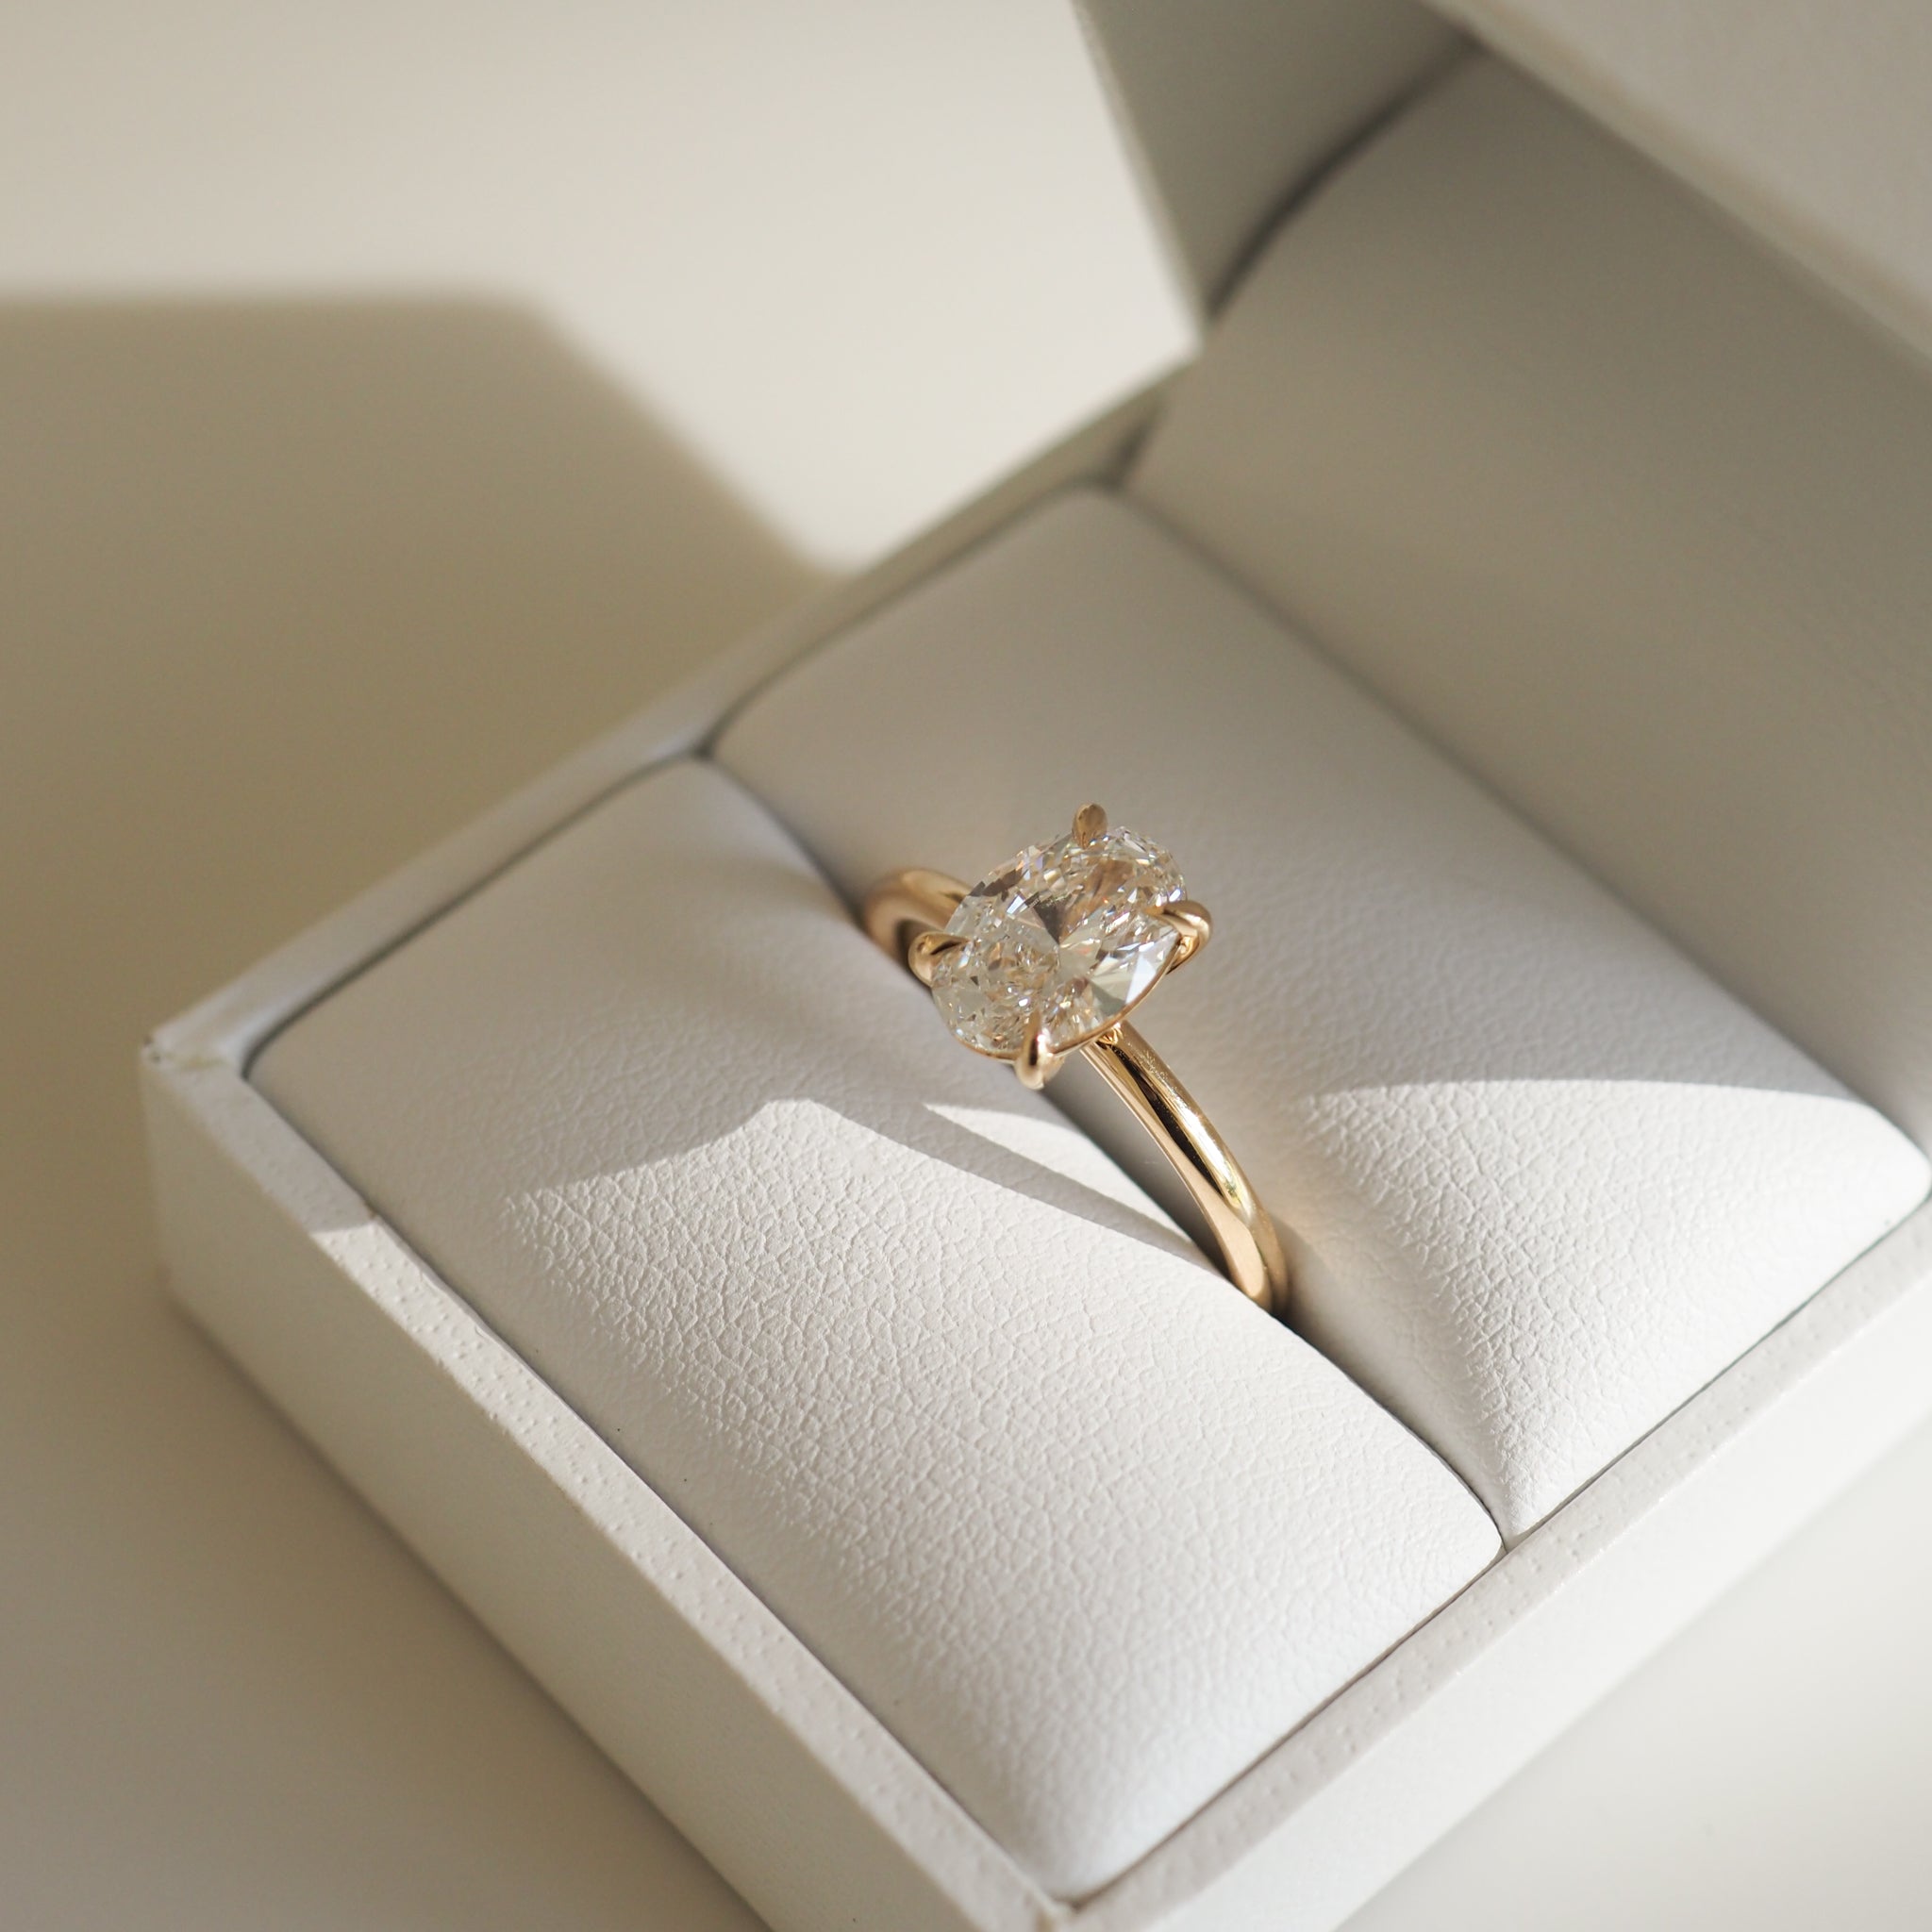 Clara | 1.31ct Oval Lab-Grown Diamond Engagement Ring Ready To Wear